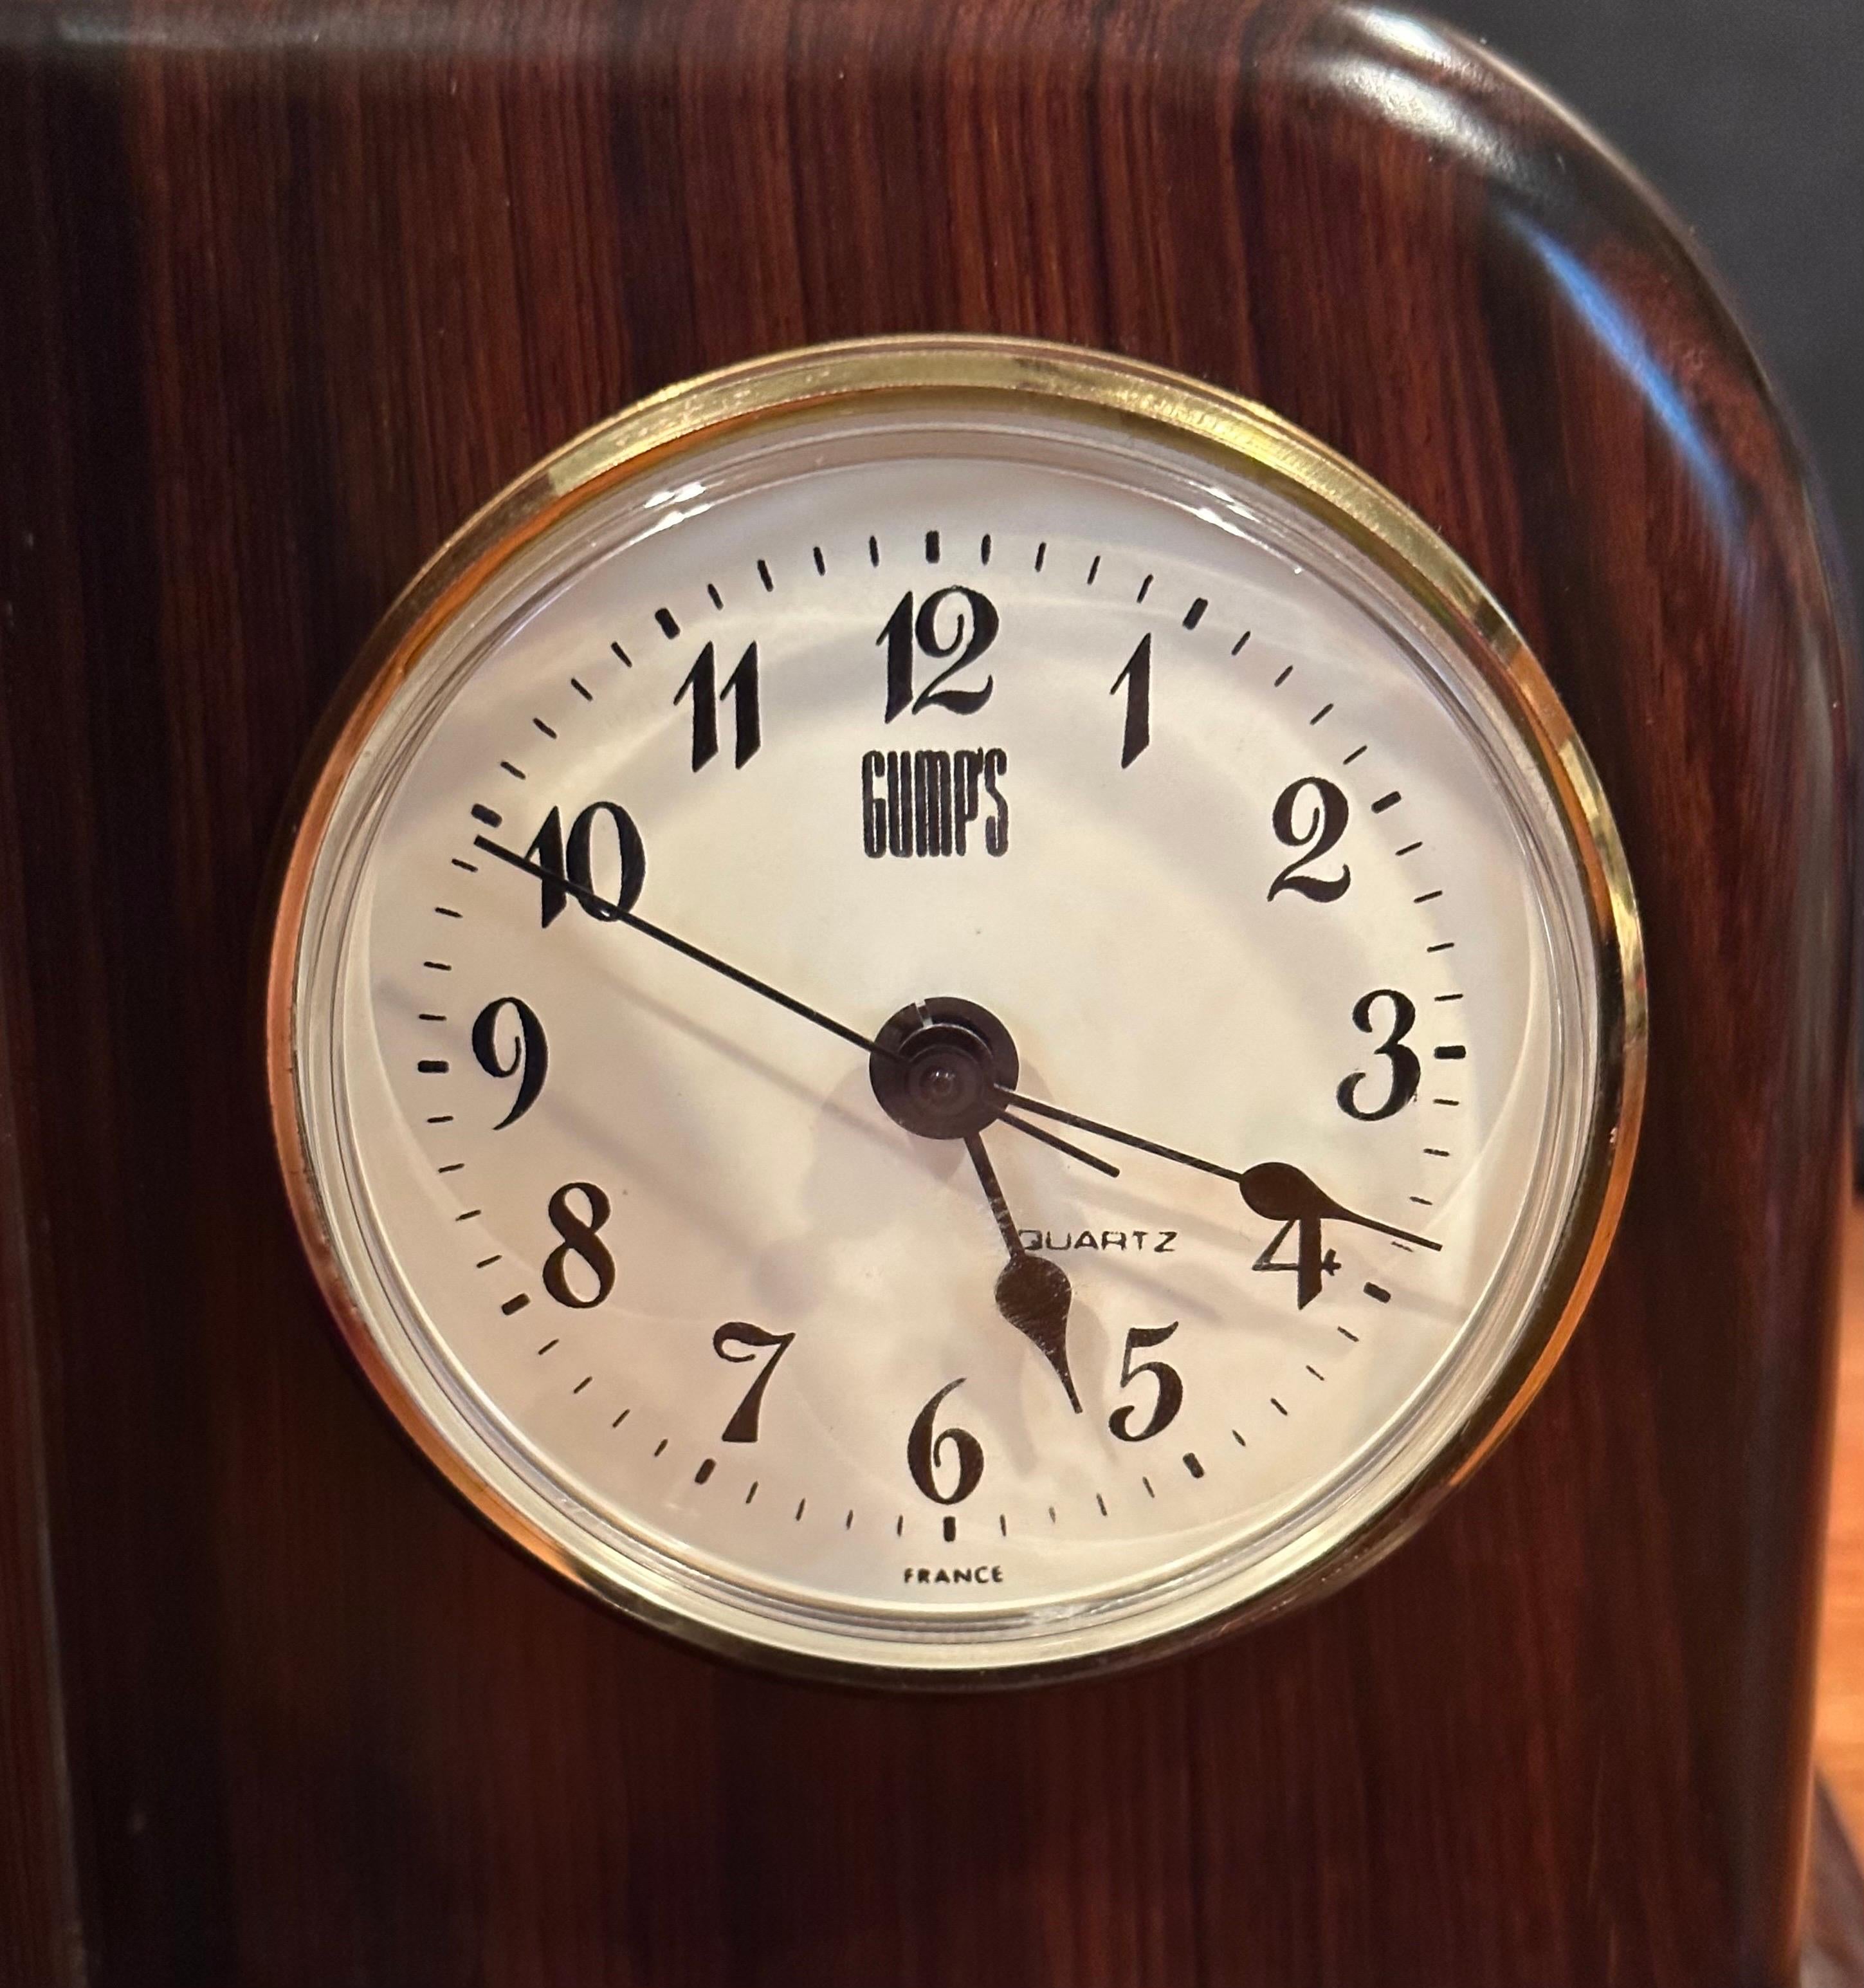 Pair of Rosewood Bookends with Clock and Thermometer by Gumps For Sale 8